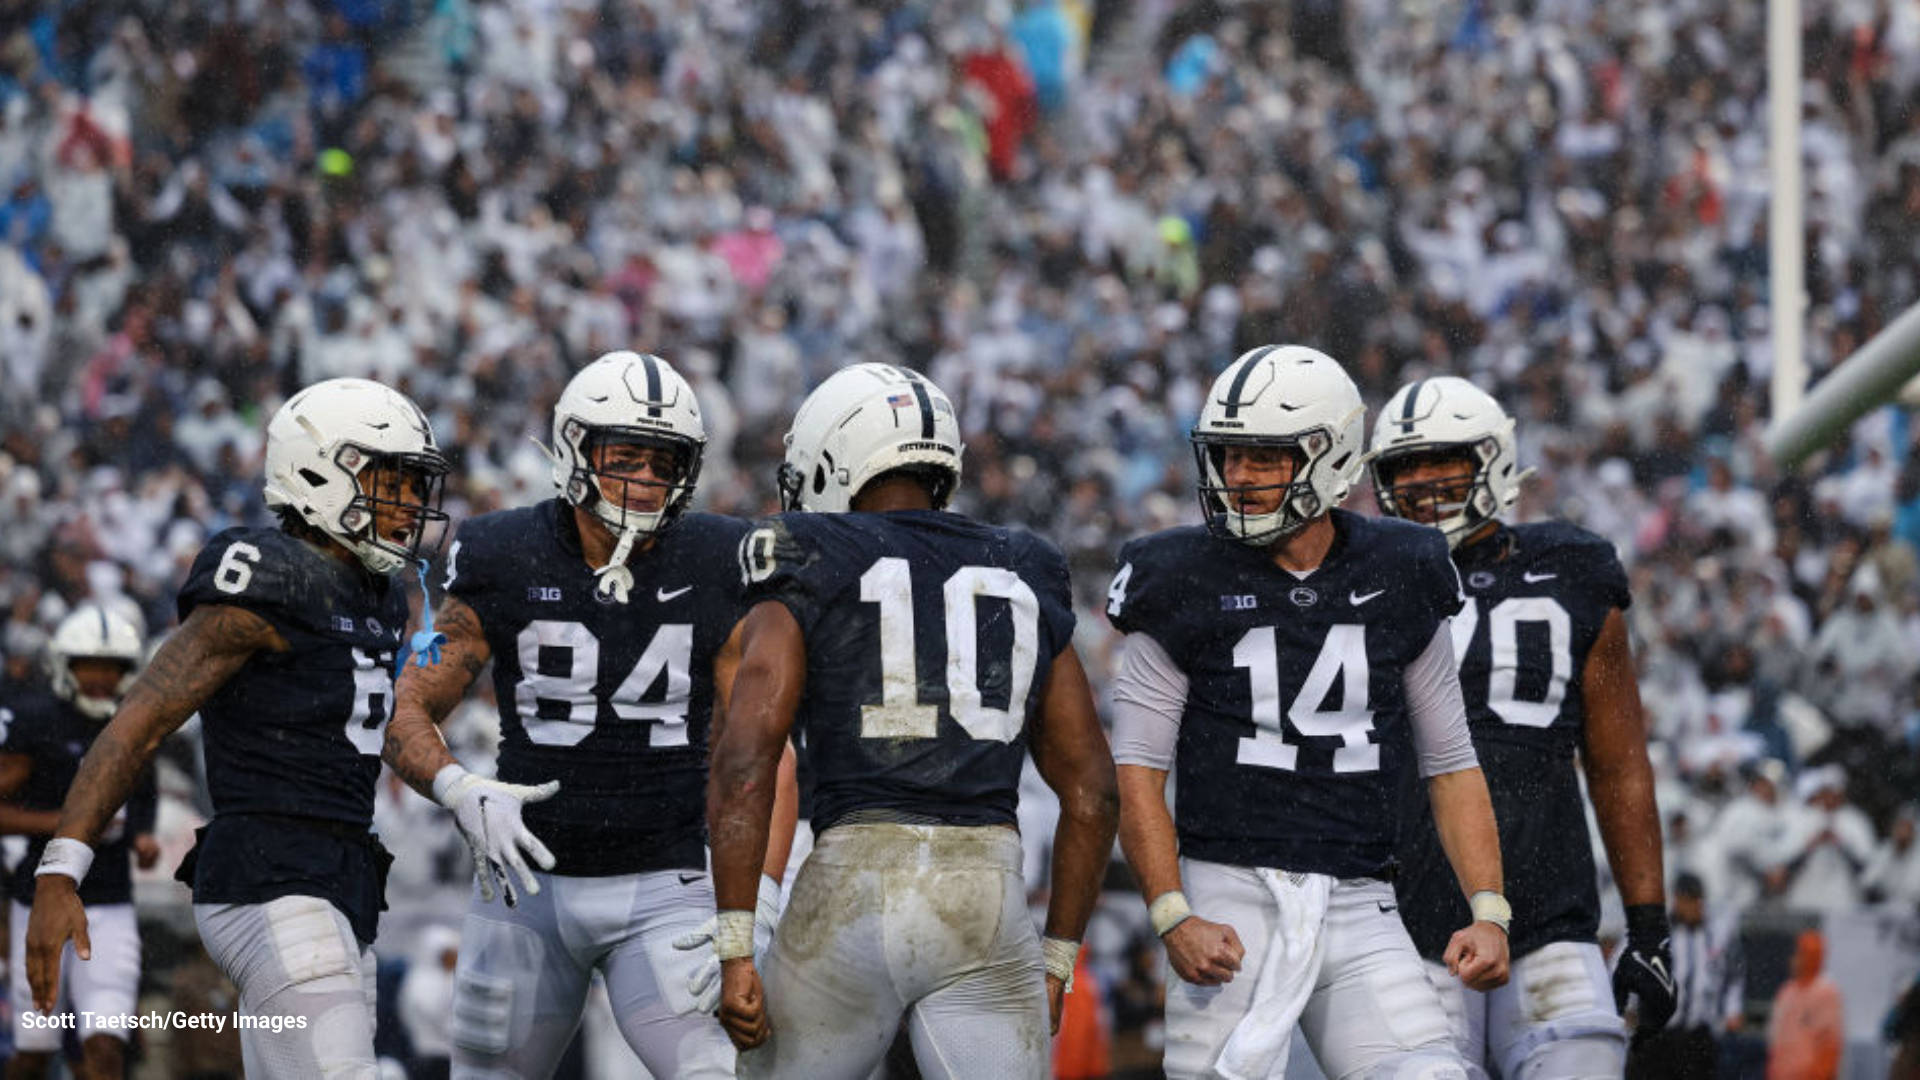 Penn State Football Players On The Field Wallpaper